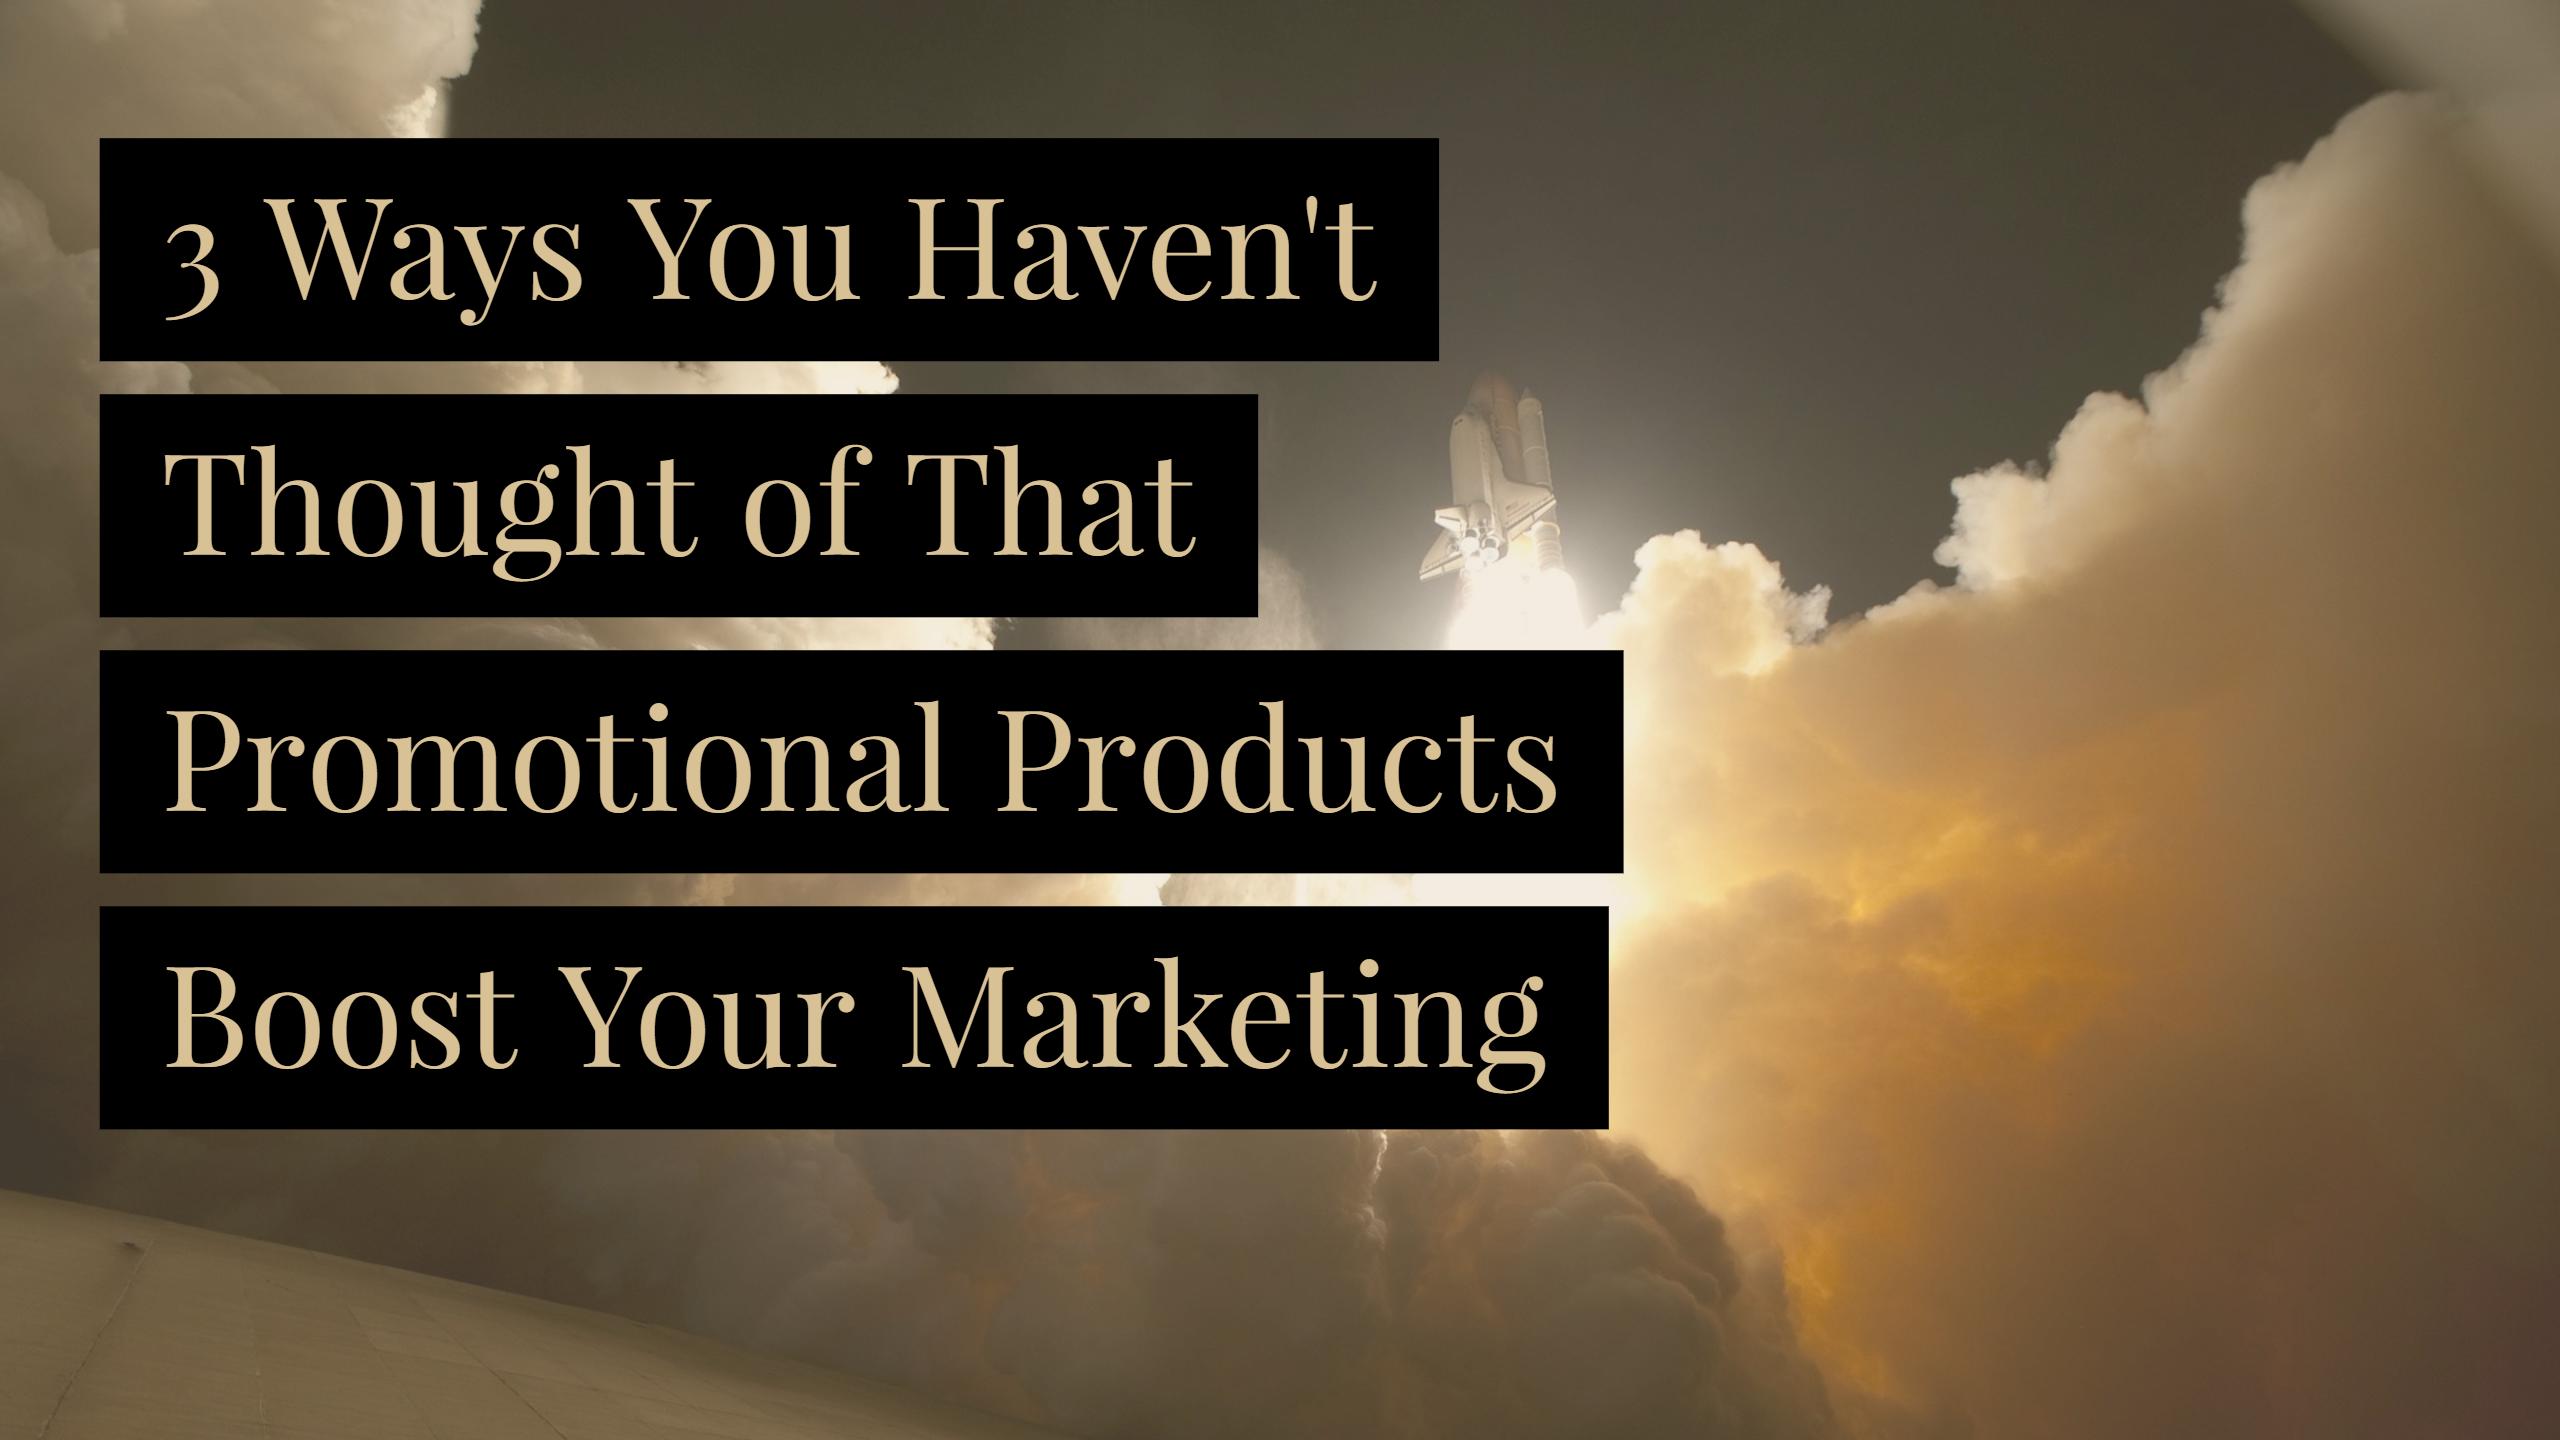 Tips on boosting your marketing with promotional products